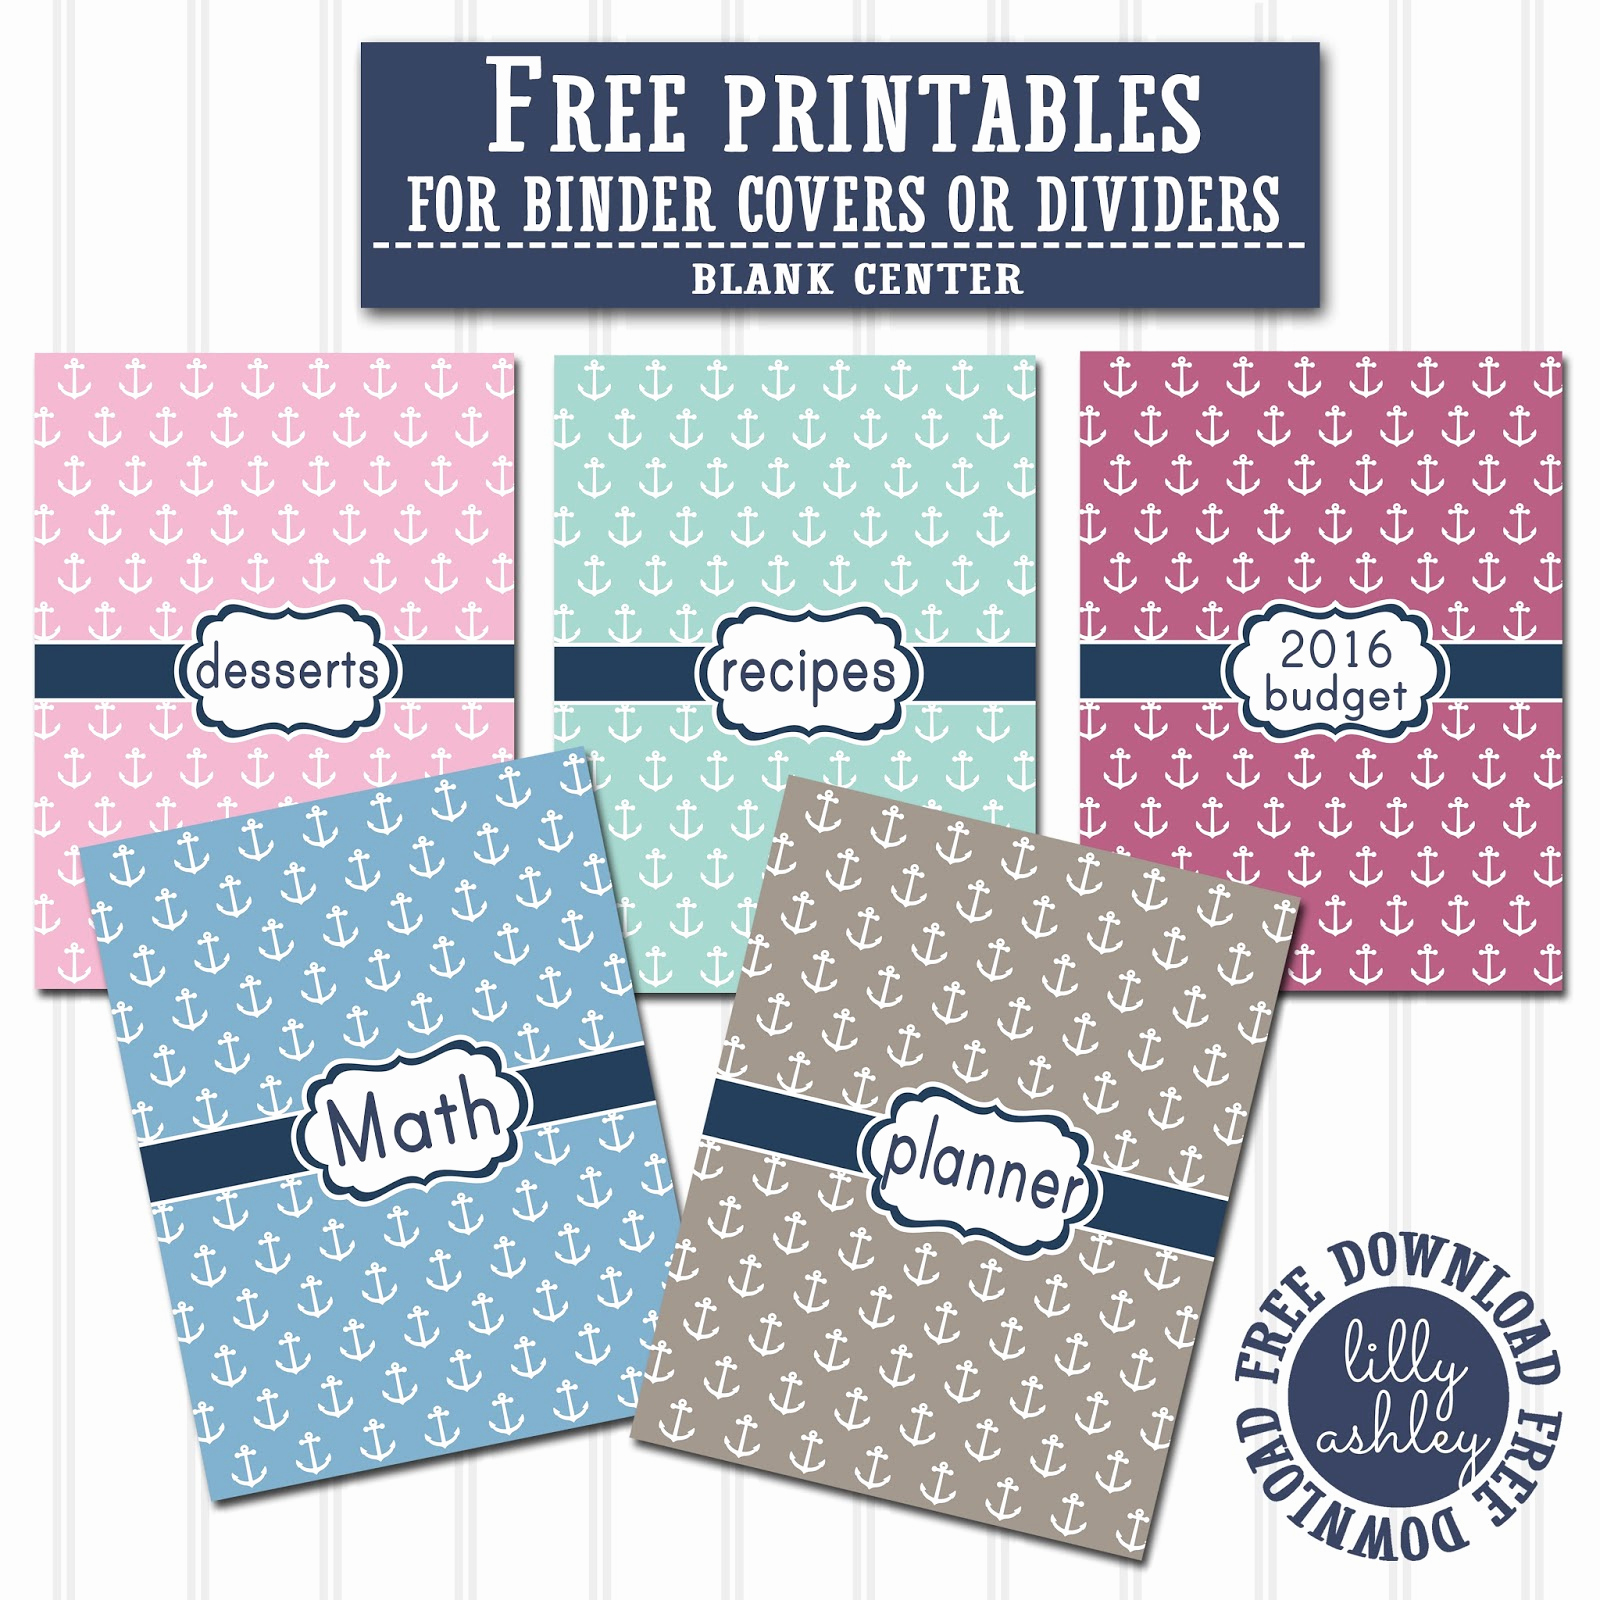 Free Printable Binder Covers New Make It Create by Lillyashley Freebie Downloads Free